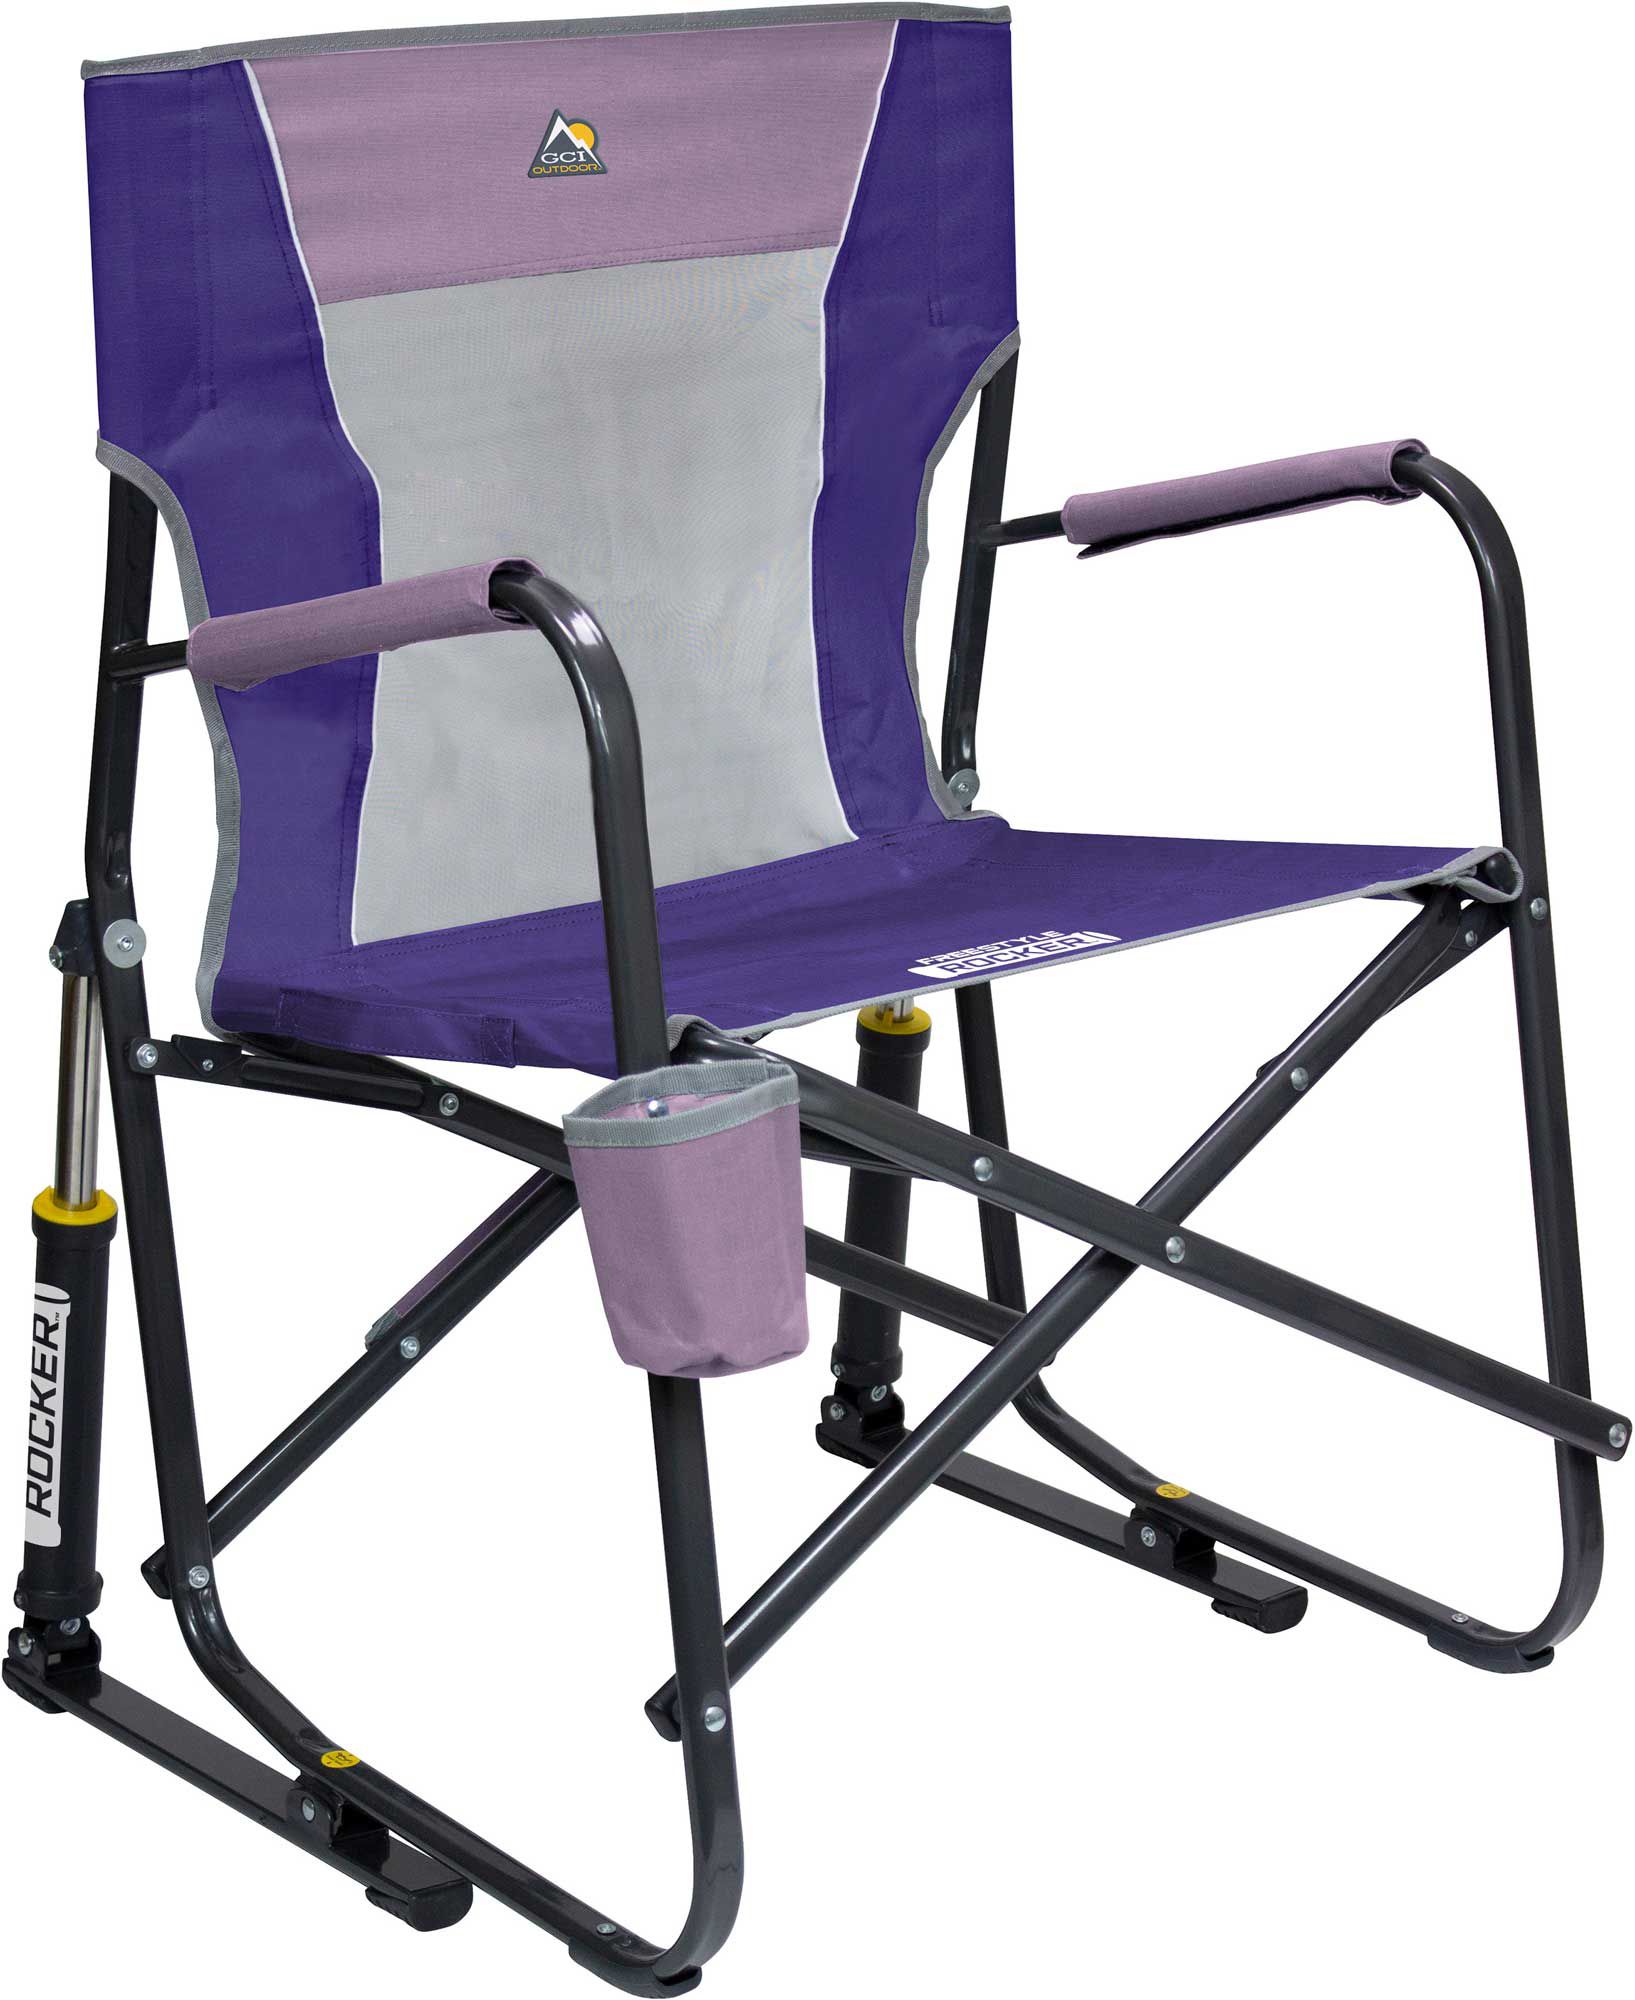 dick's sporting goods lawn chairs